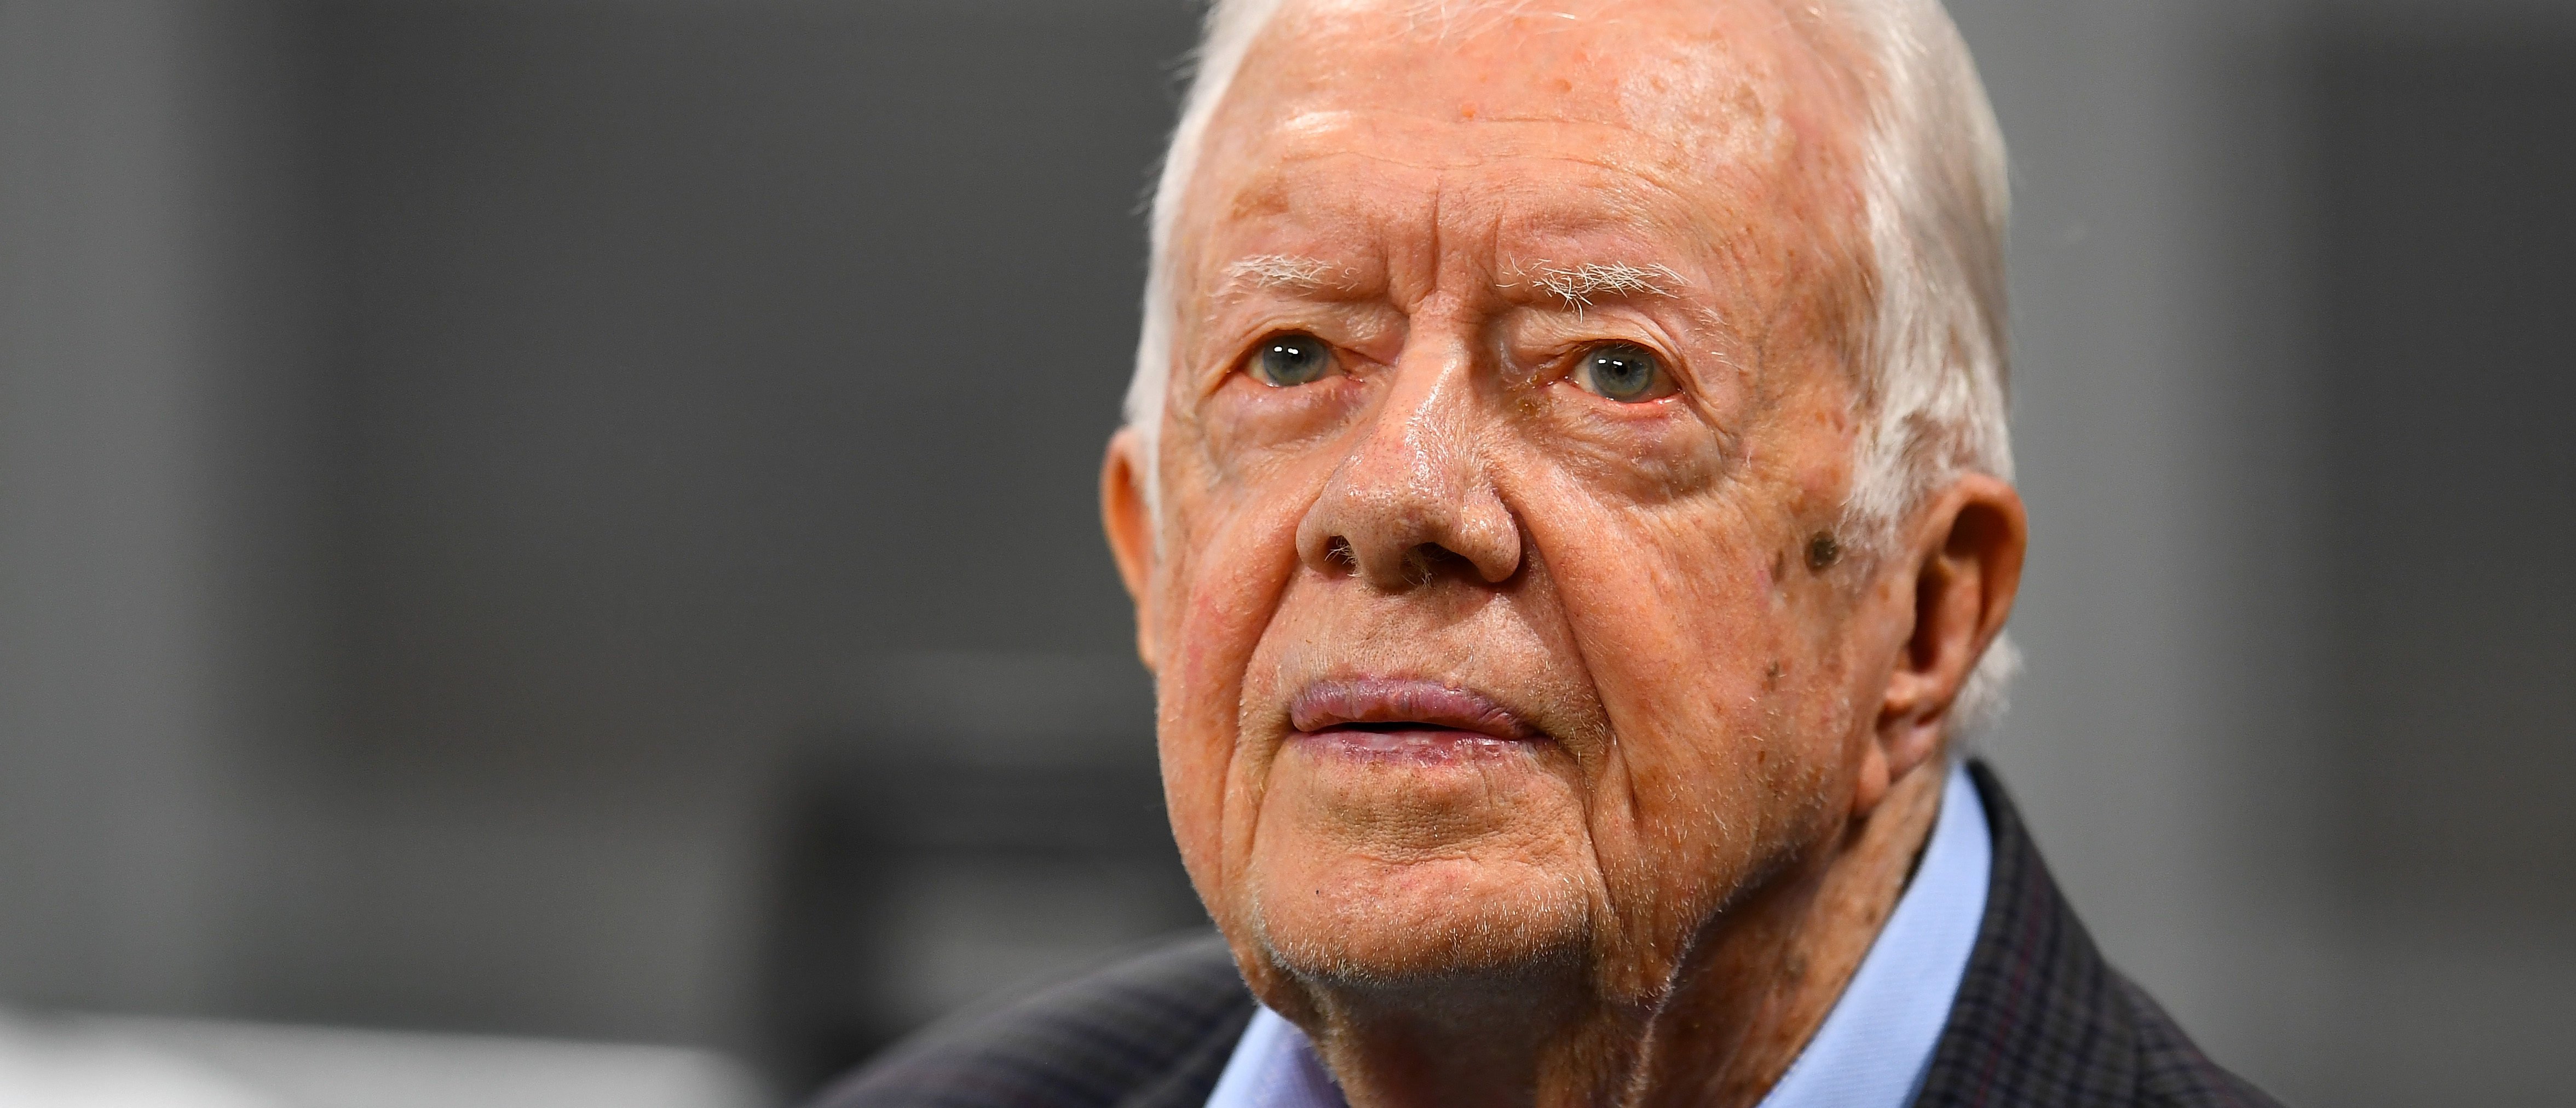 Jimmy Carter Hopes There Is ‘An Age Limit’ On The Presidency The